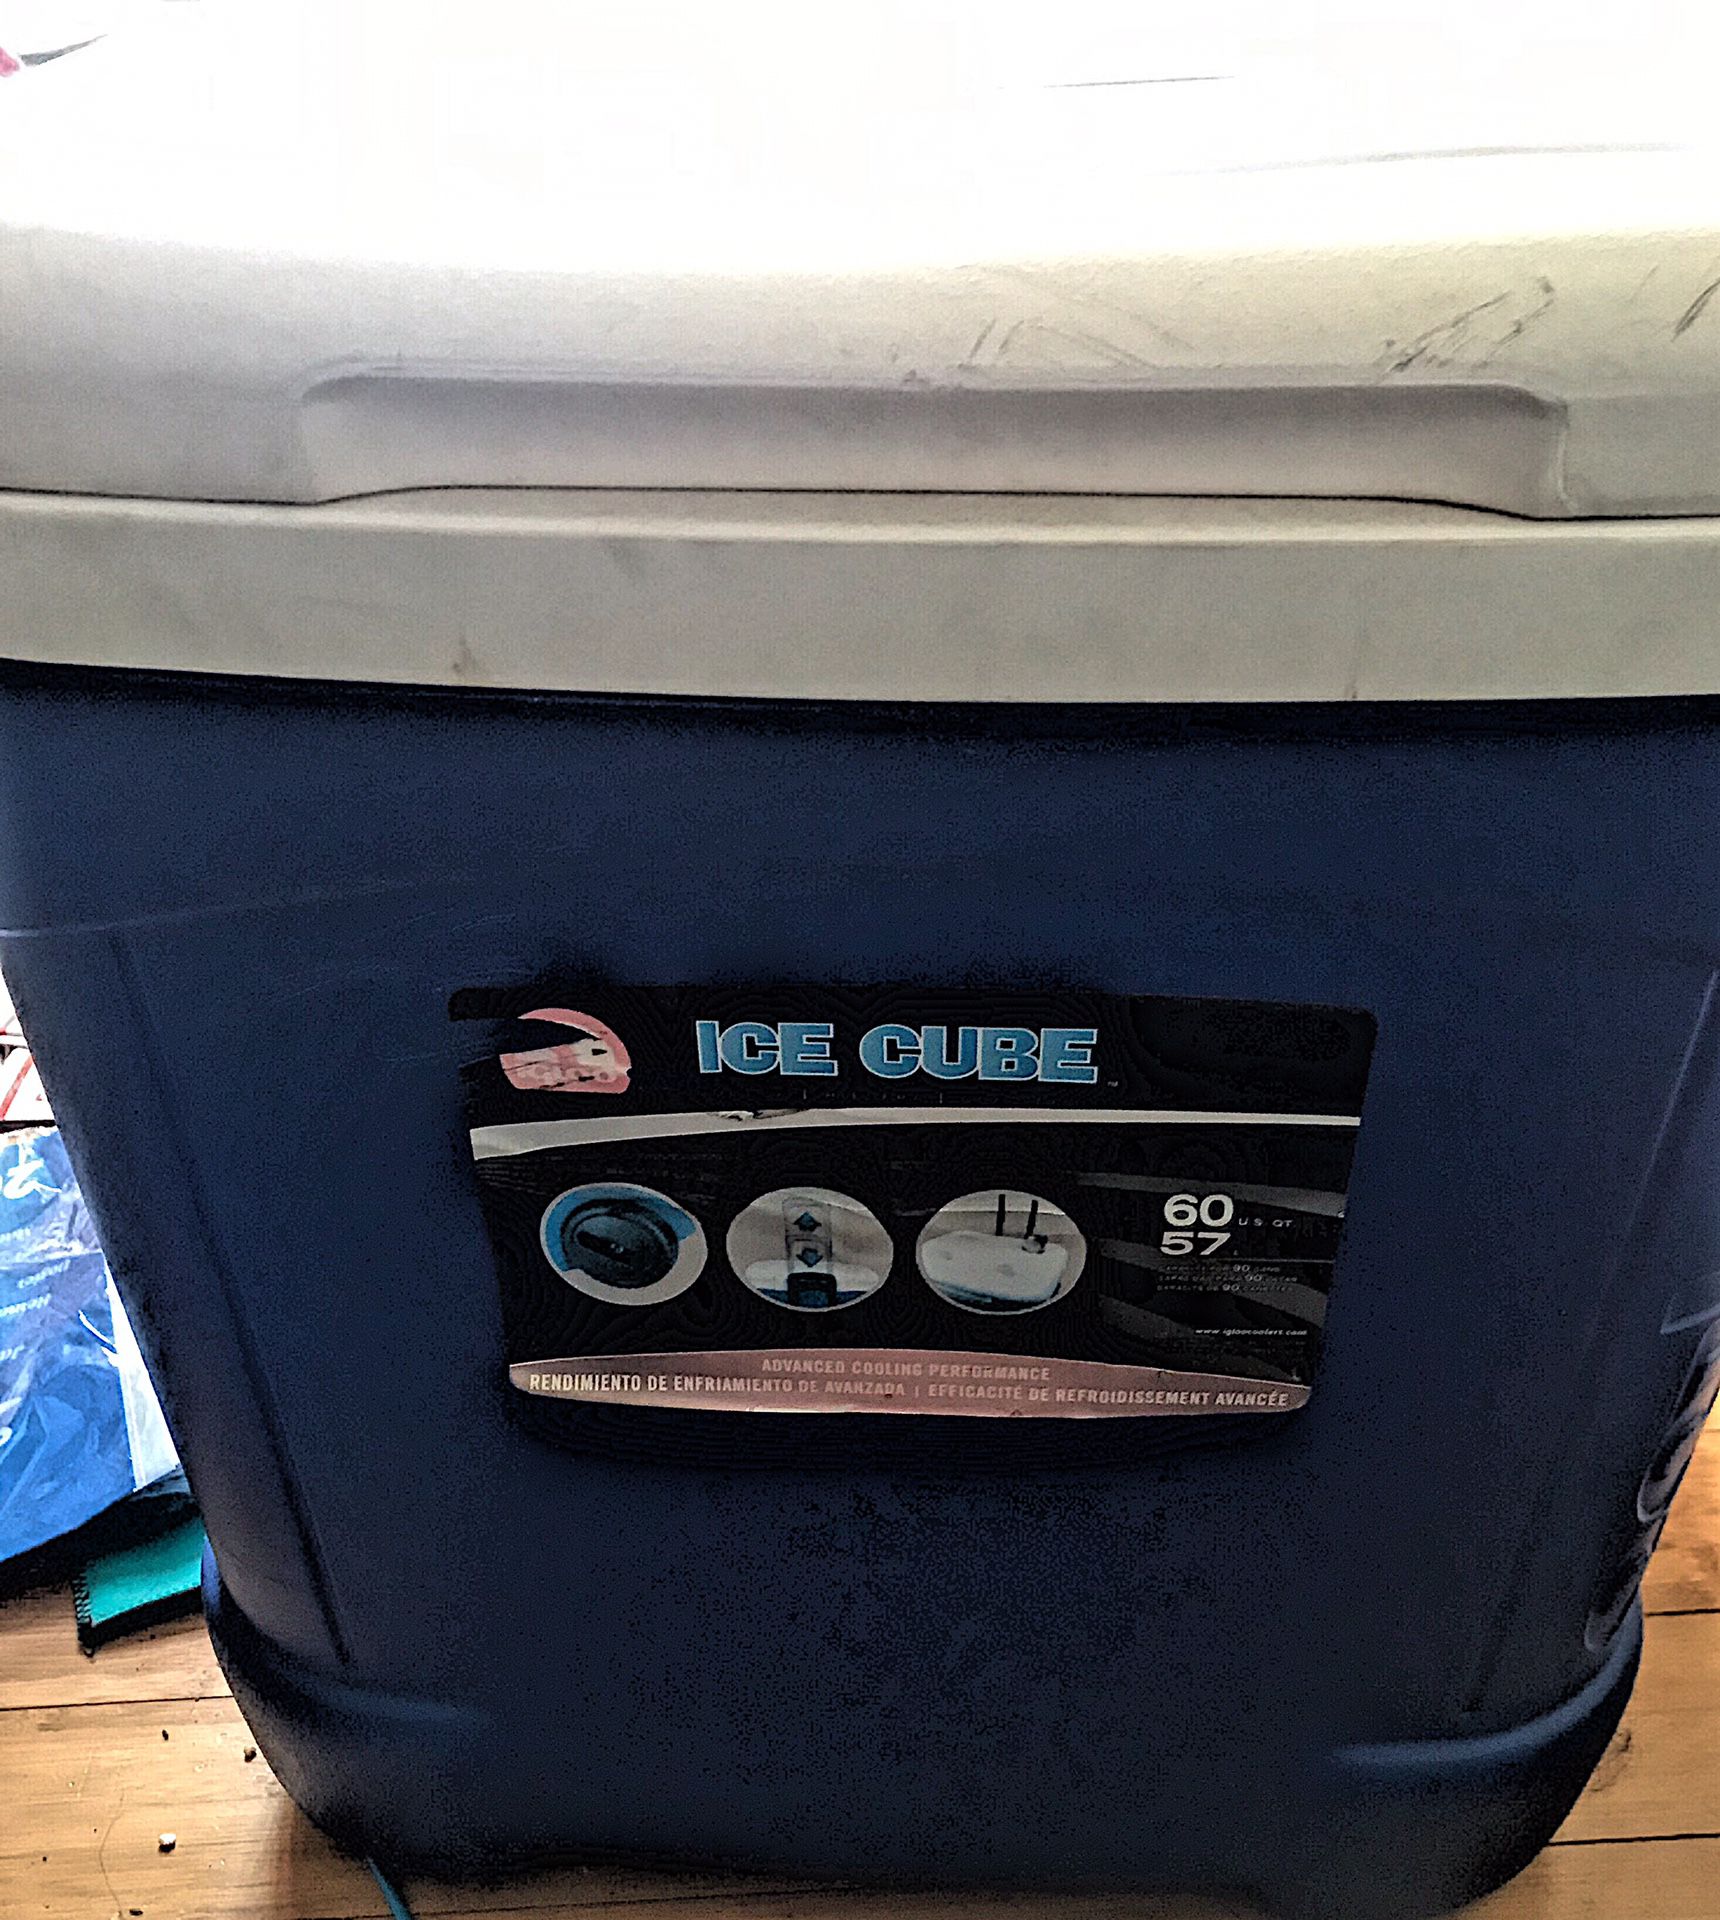 60-Quart Ice Cube Roller Cooler, Ice Chest, Ice Cooler